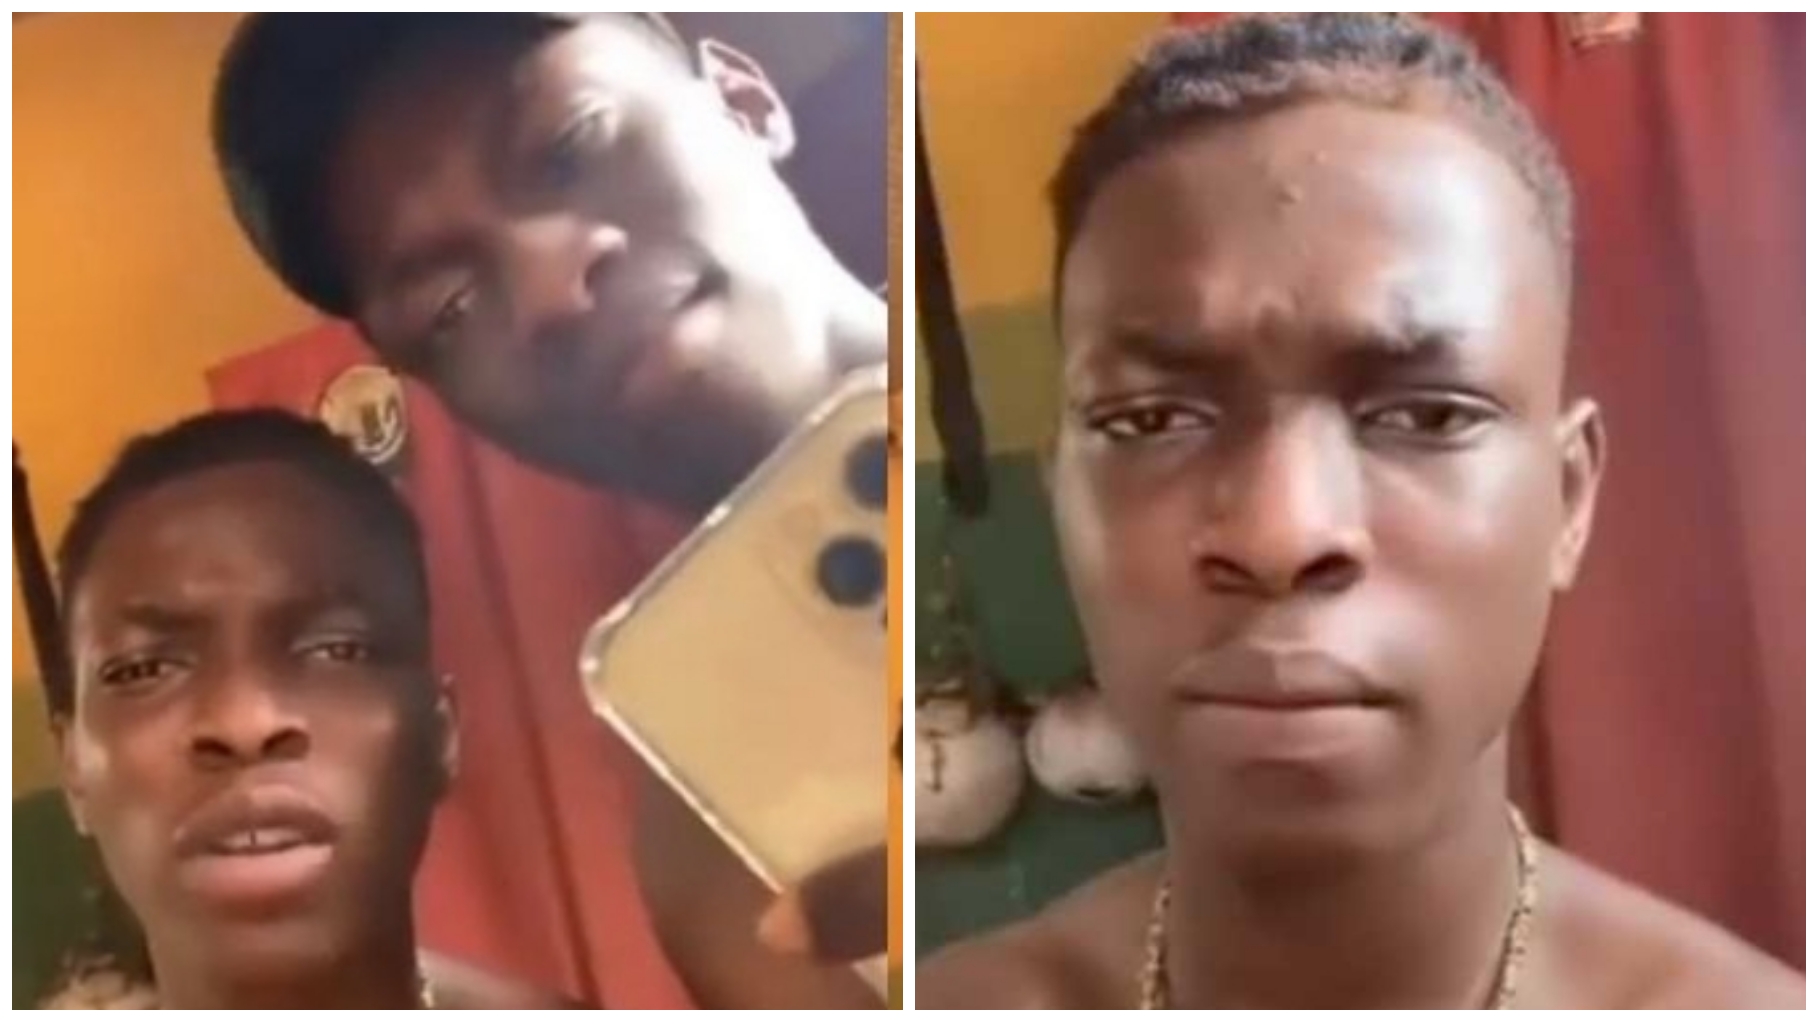 "If we show you way, you fit do am?” – Suspected yahoo boys/r!tualist says as they show off shrine (Video)